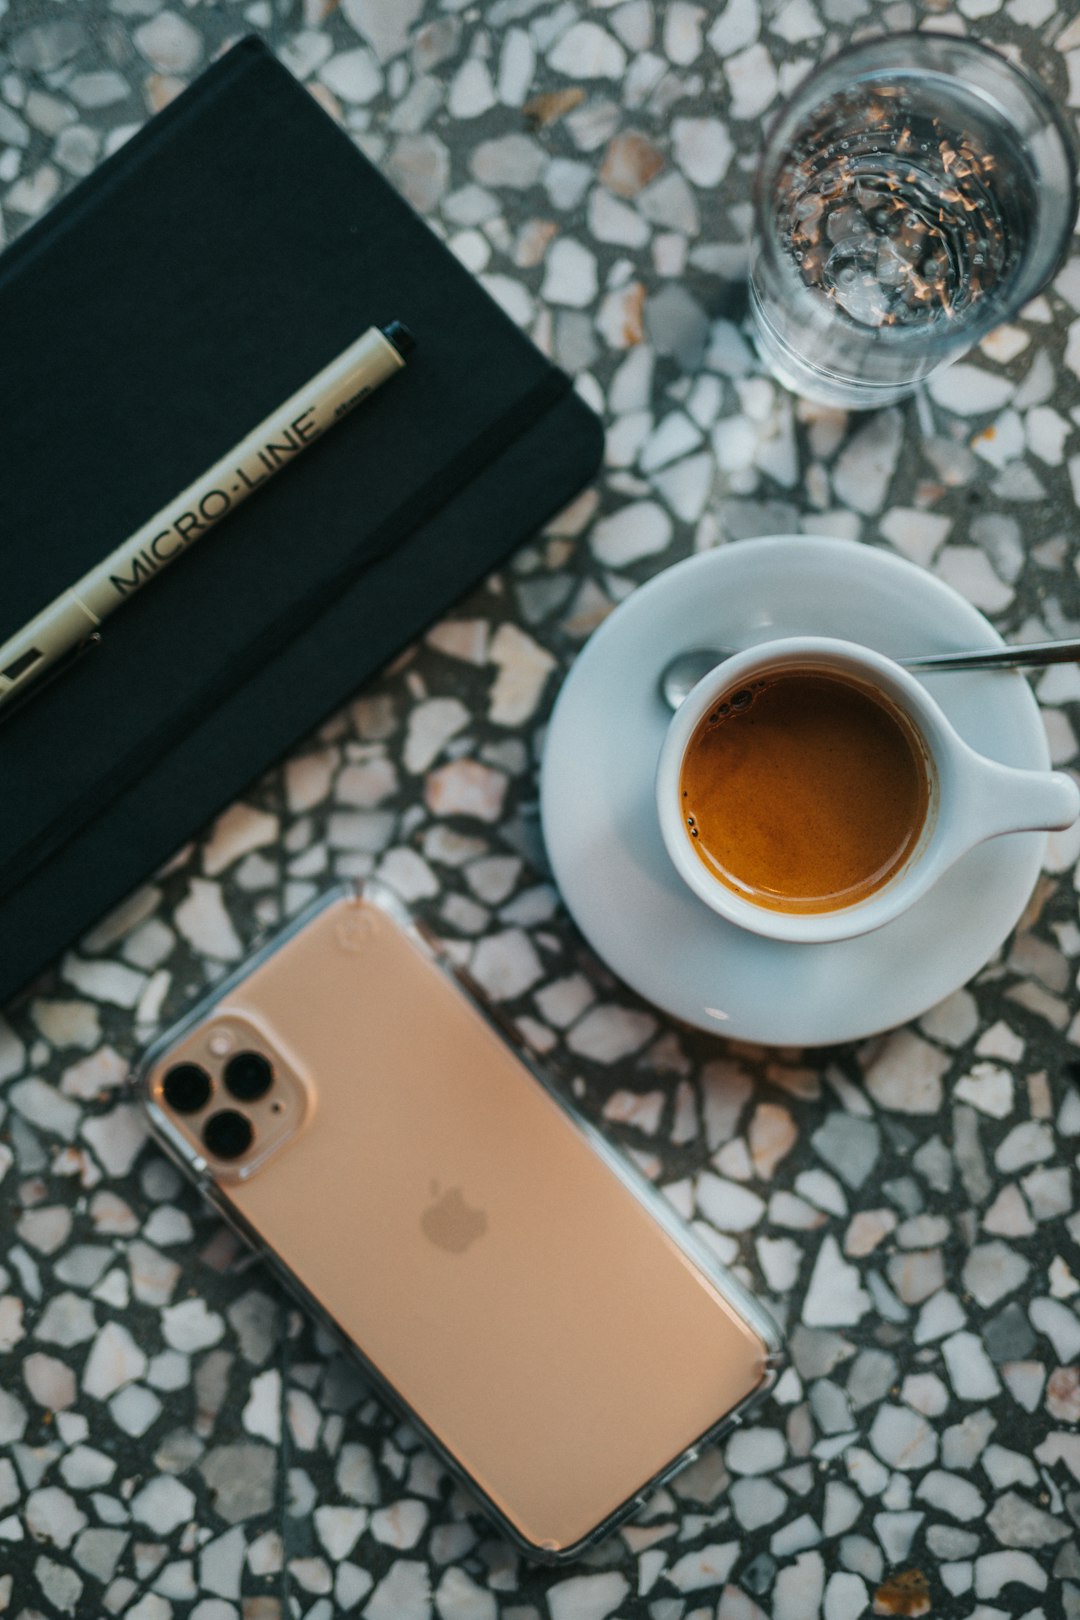 gold iPhone 11 beside cup on table